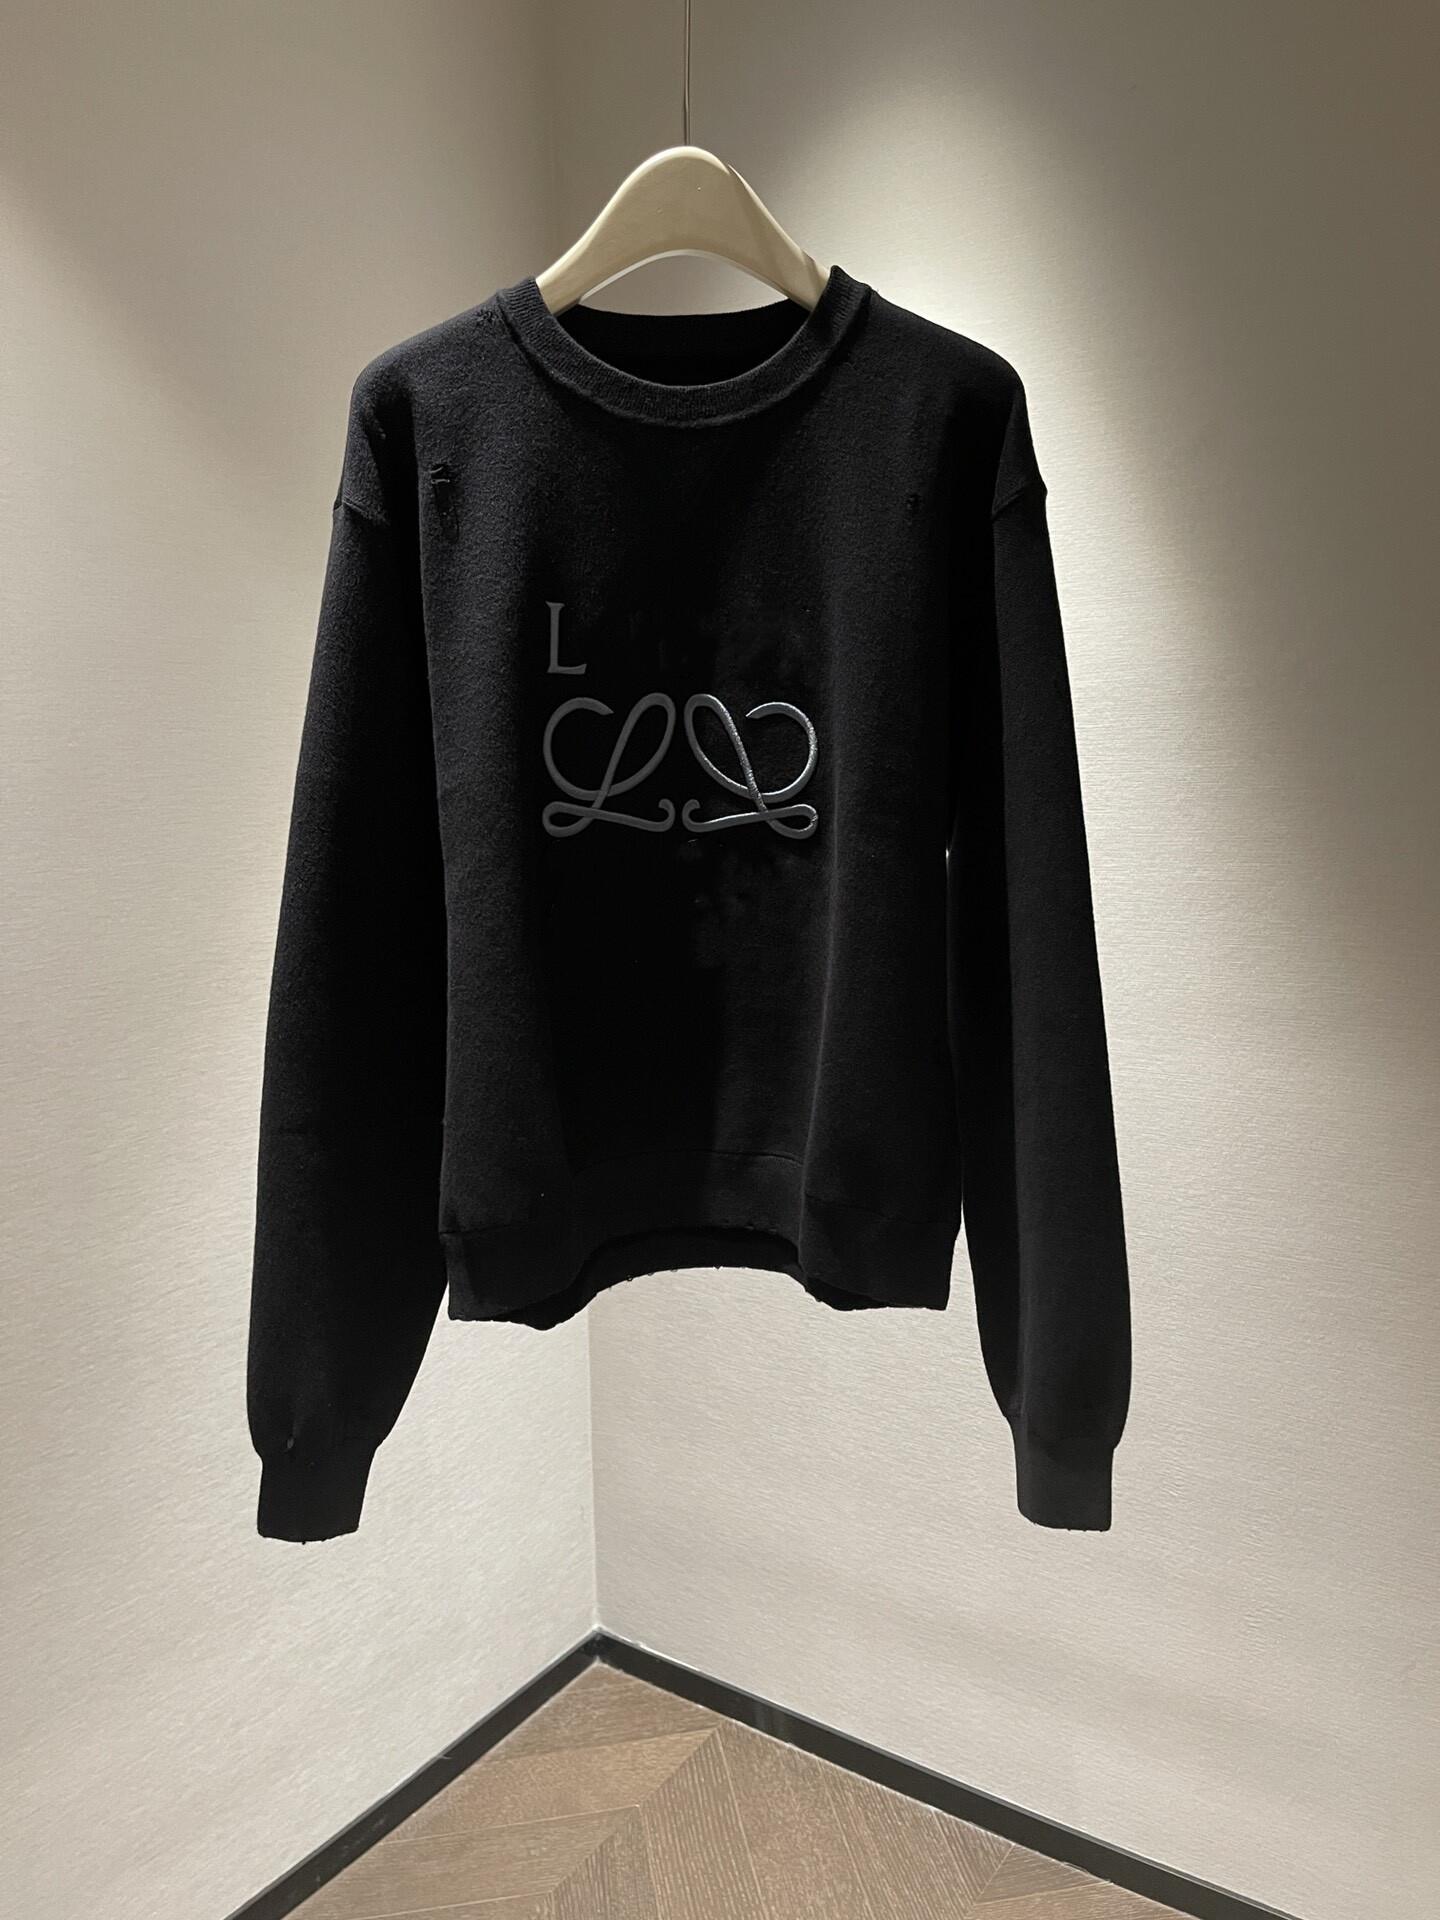 2023 New Europe women and mens designer sweaters retro classic luxury sweatshirt men Arm letter embroidery Round neck comfortable high-quality jumper E4